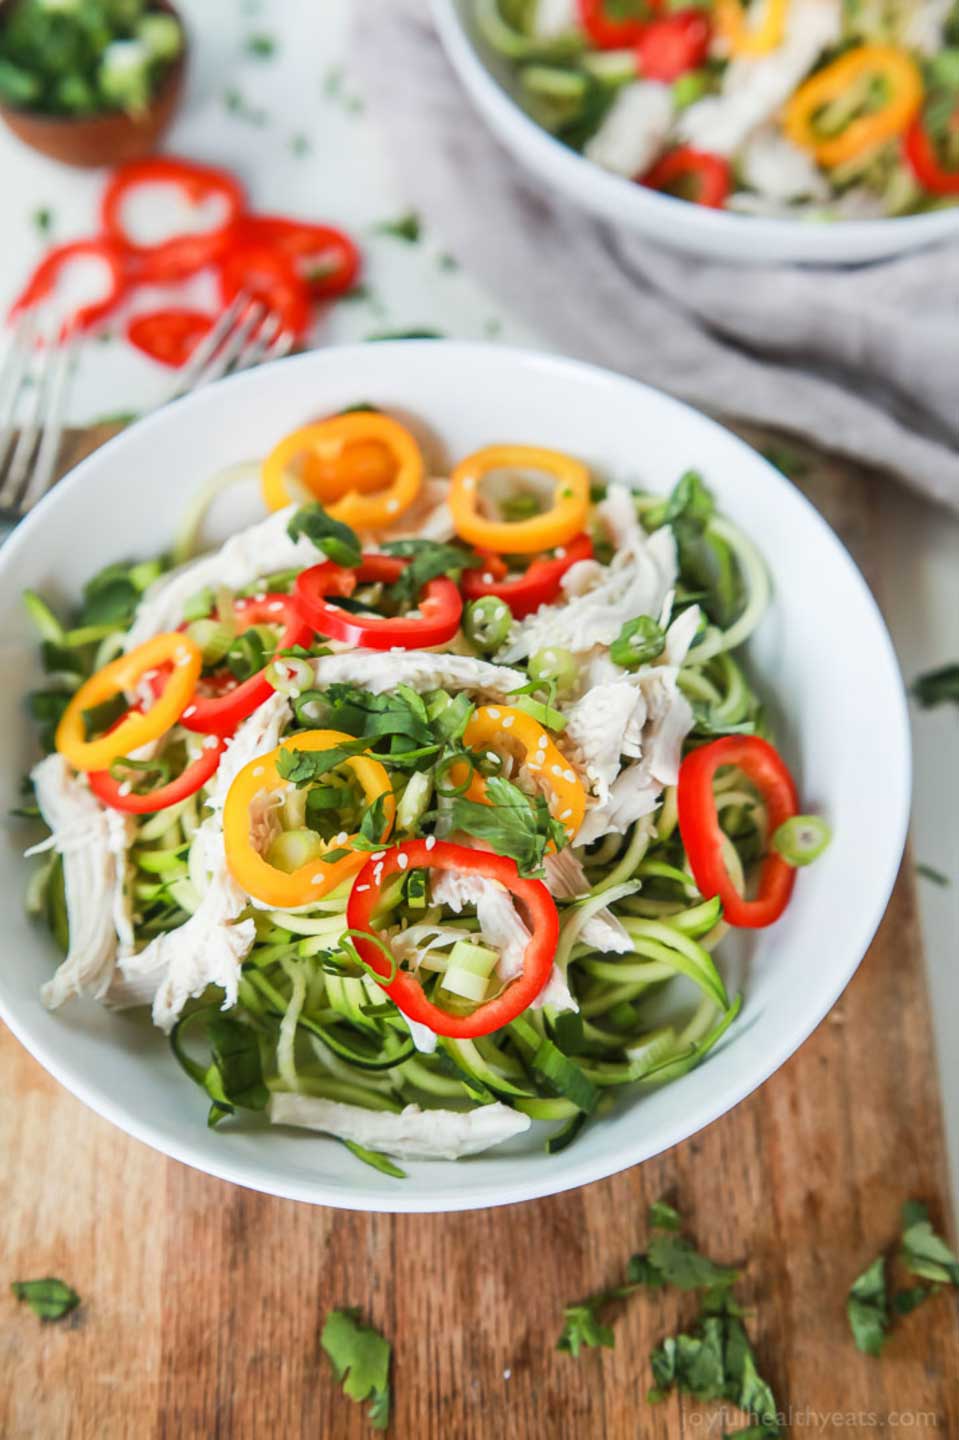 33 Game-Changing, Healthy Zoodles (Zucchini Noodles) Recipes - Two ...